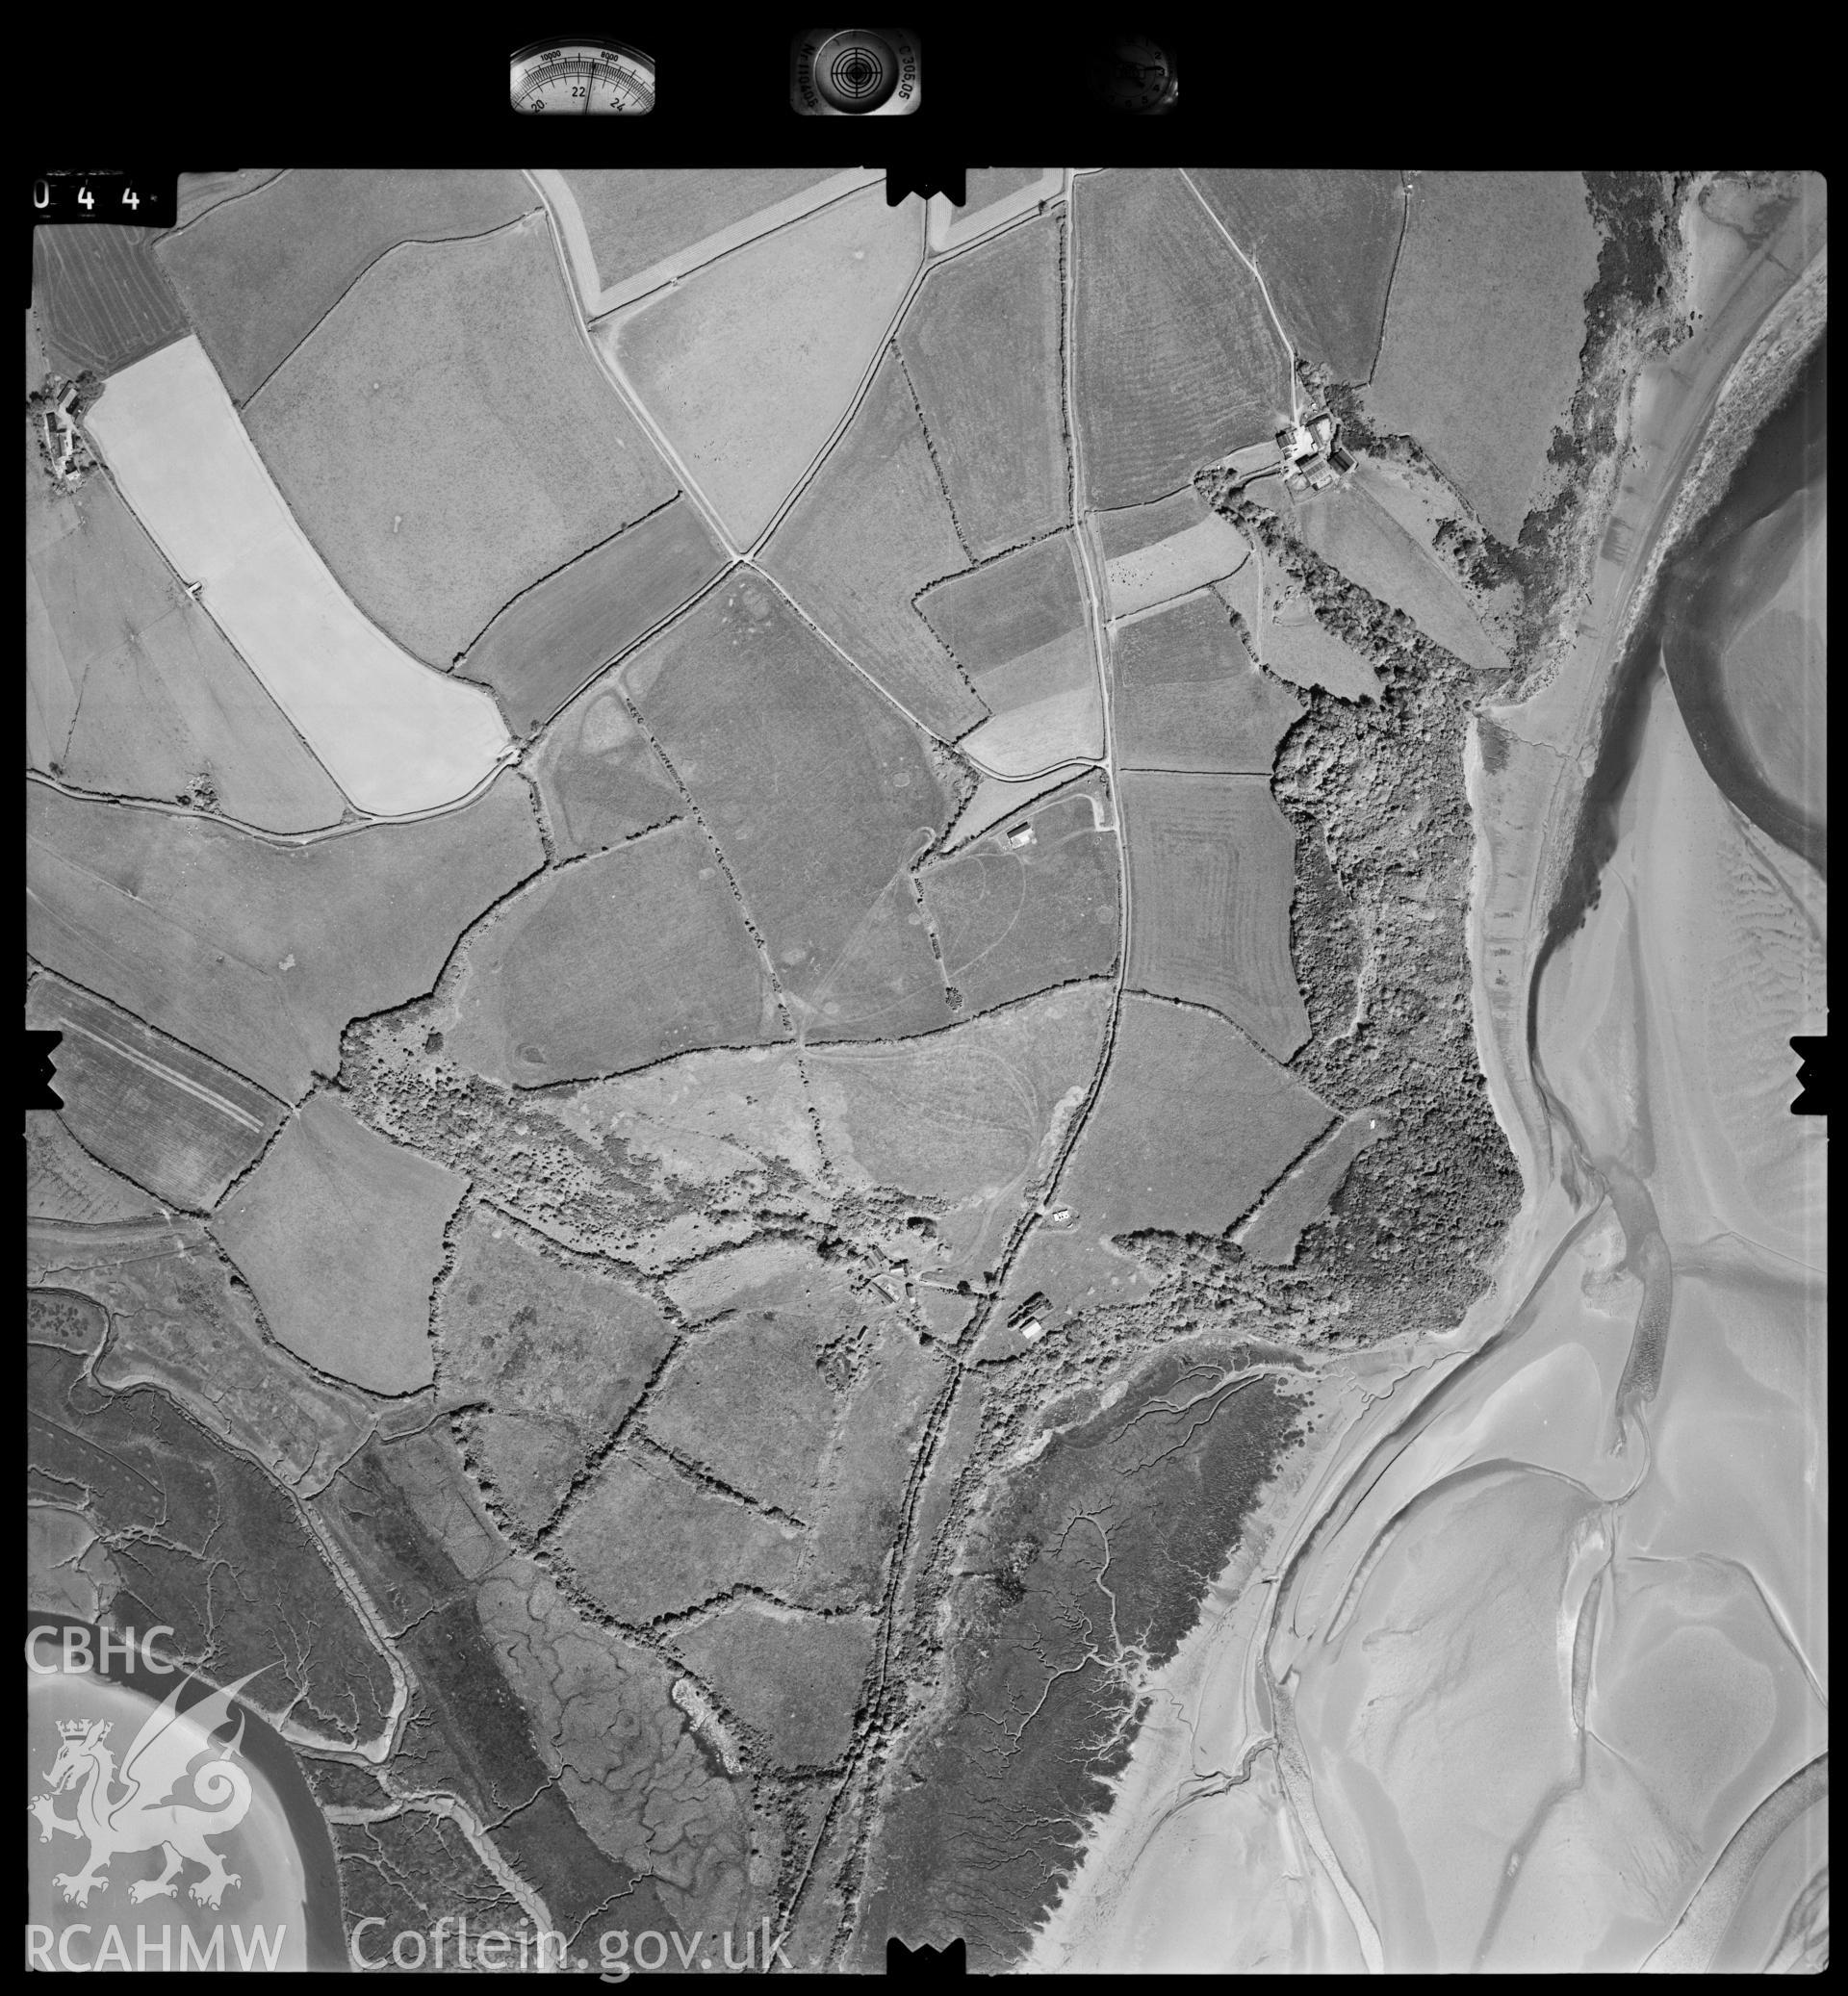 Digitized copy of an aerial photograph showing the area around Pentwyn, taken by Ordnance Survey, 1997.